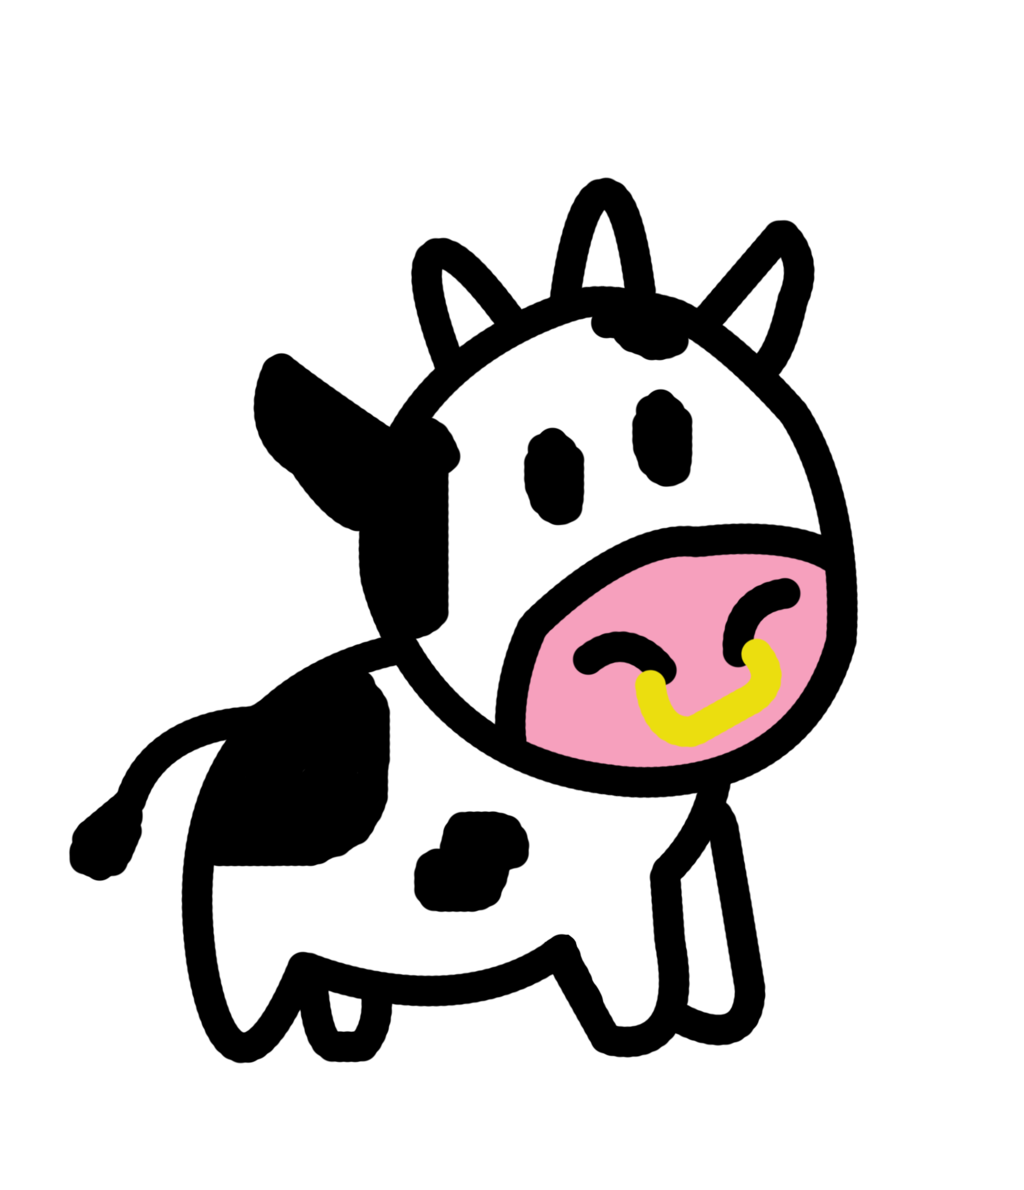 Free Cute Cow Png, Download Free Clip Art, Free Clip Art on Clipart Library